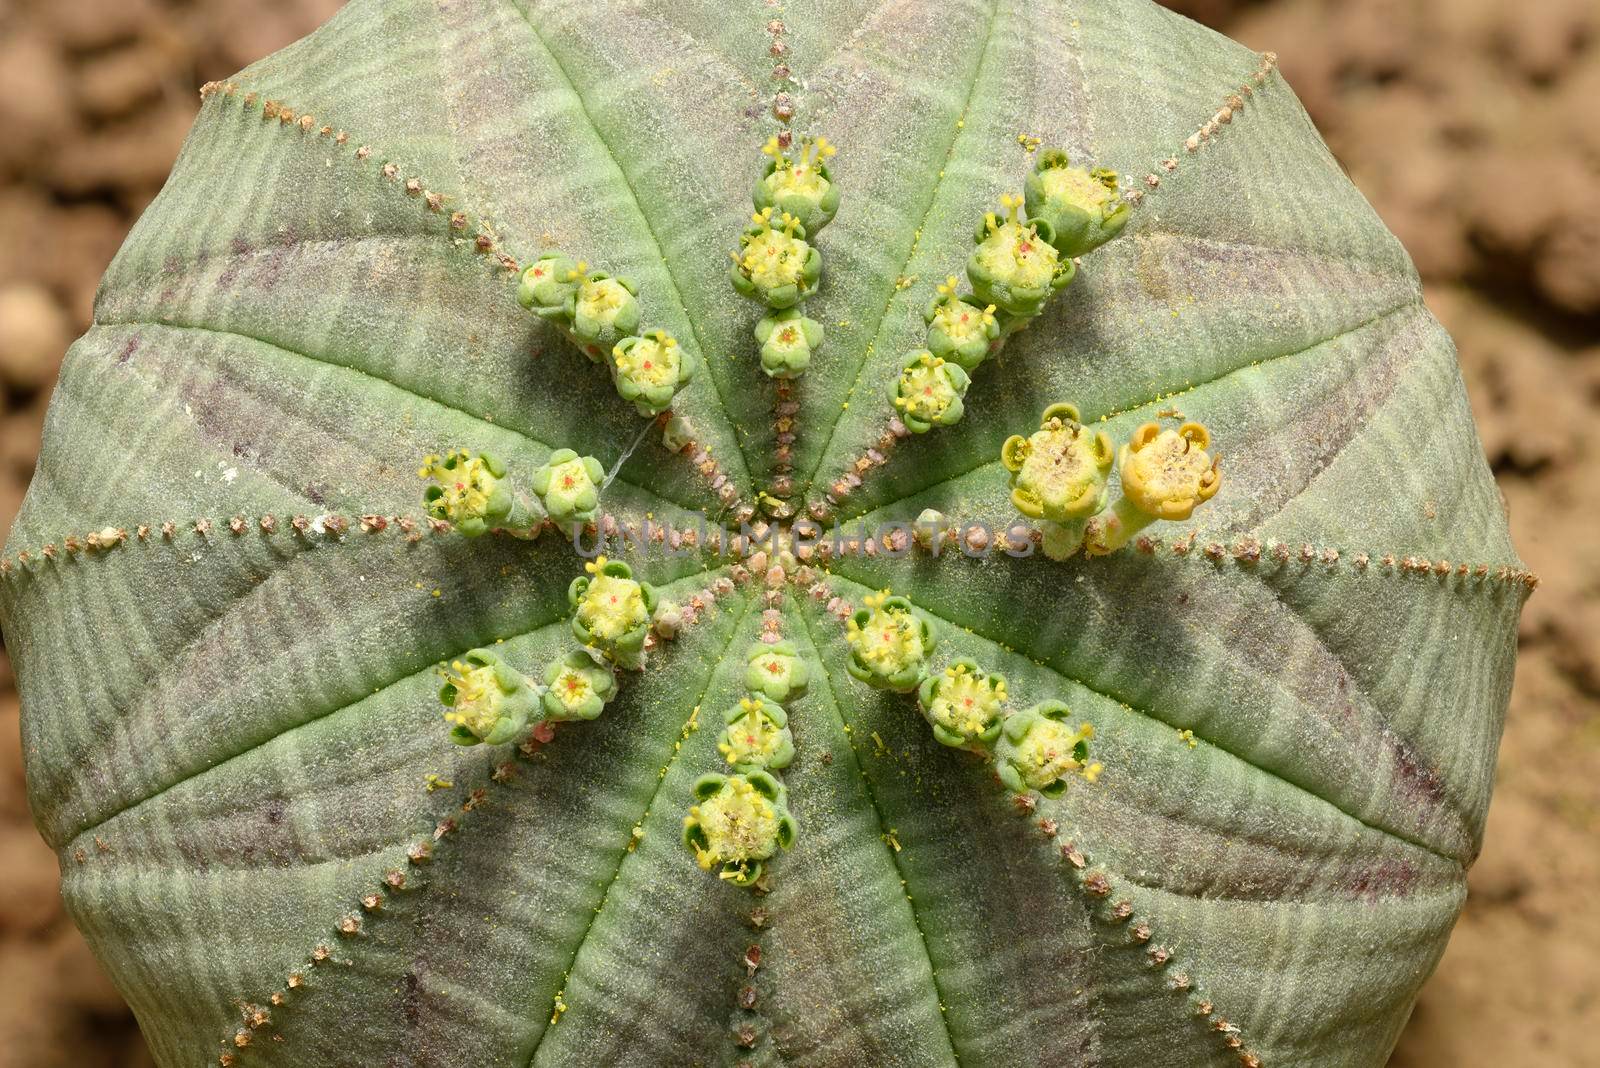 Baseball plant with flowers, Euphorbia obesa, subtropical succulent species from South Africa.